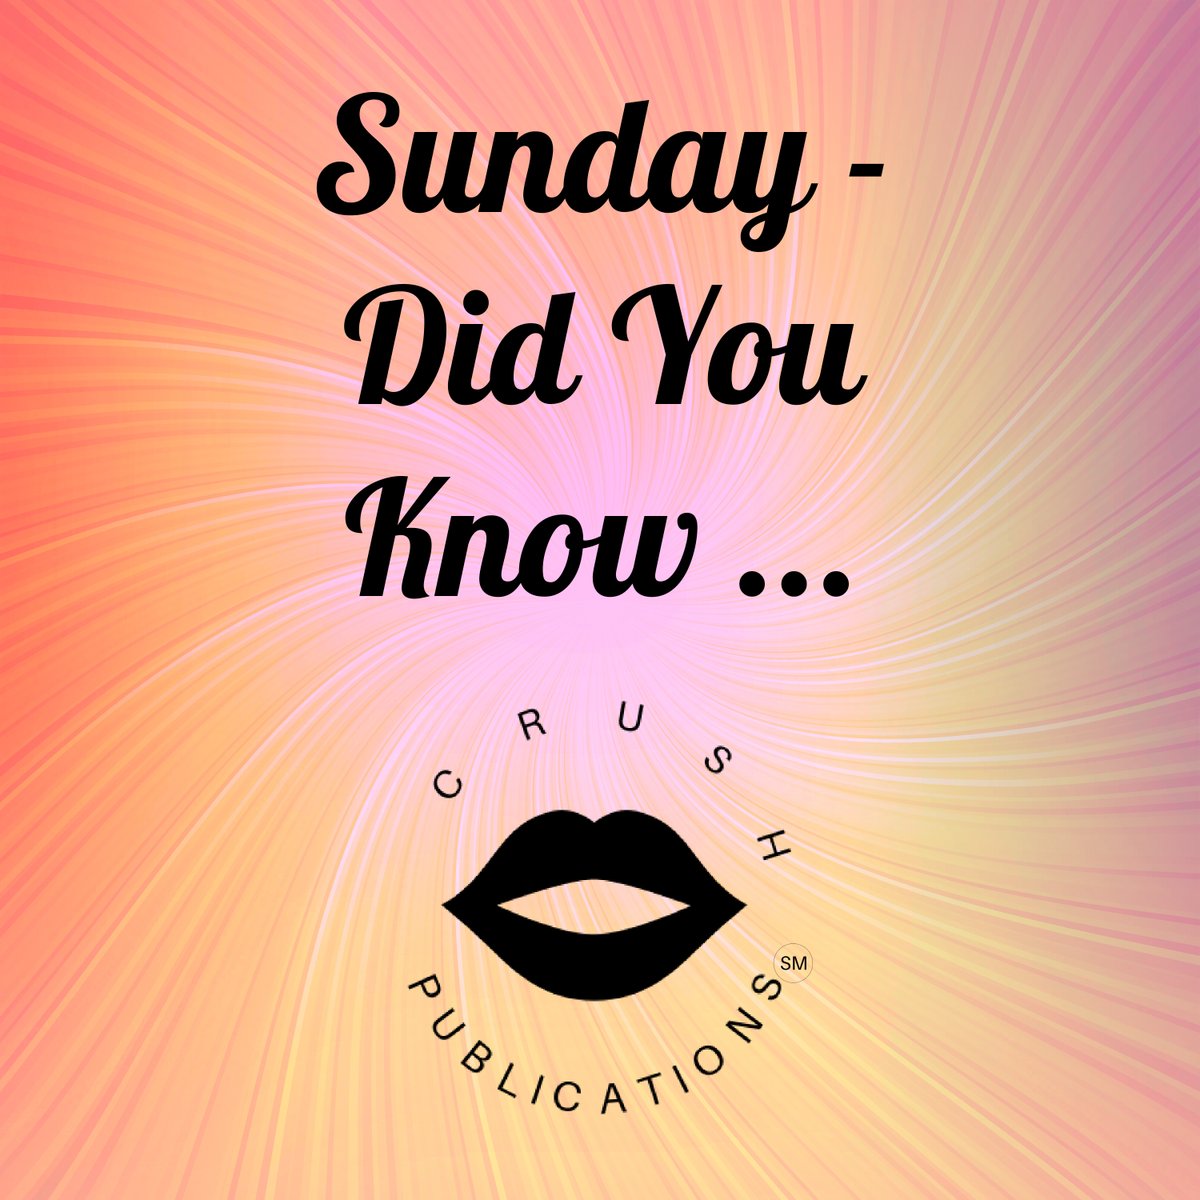 Did you know: Women get erections! The clit is made of the same spongy tissue as a penis and expands and becomes engorged with blood flow when aroused. #DidYouKnowSunday